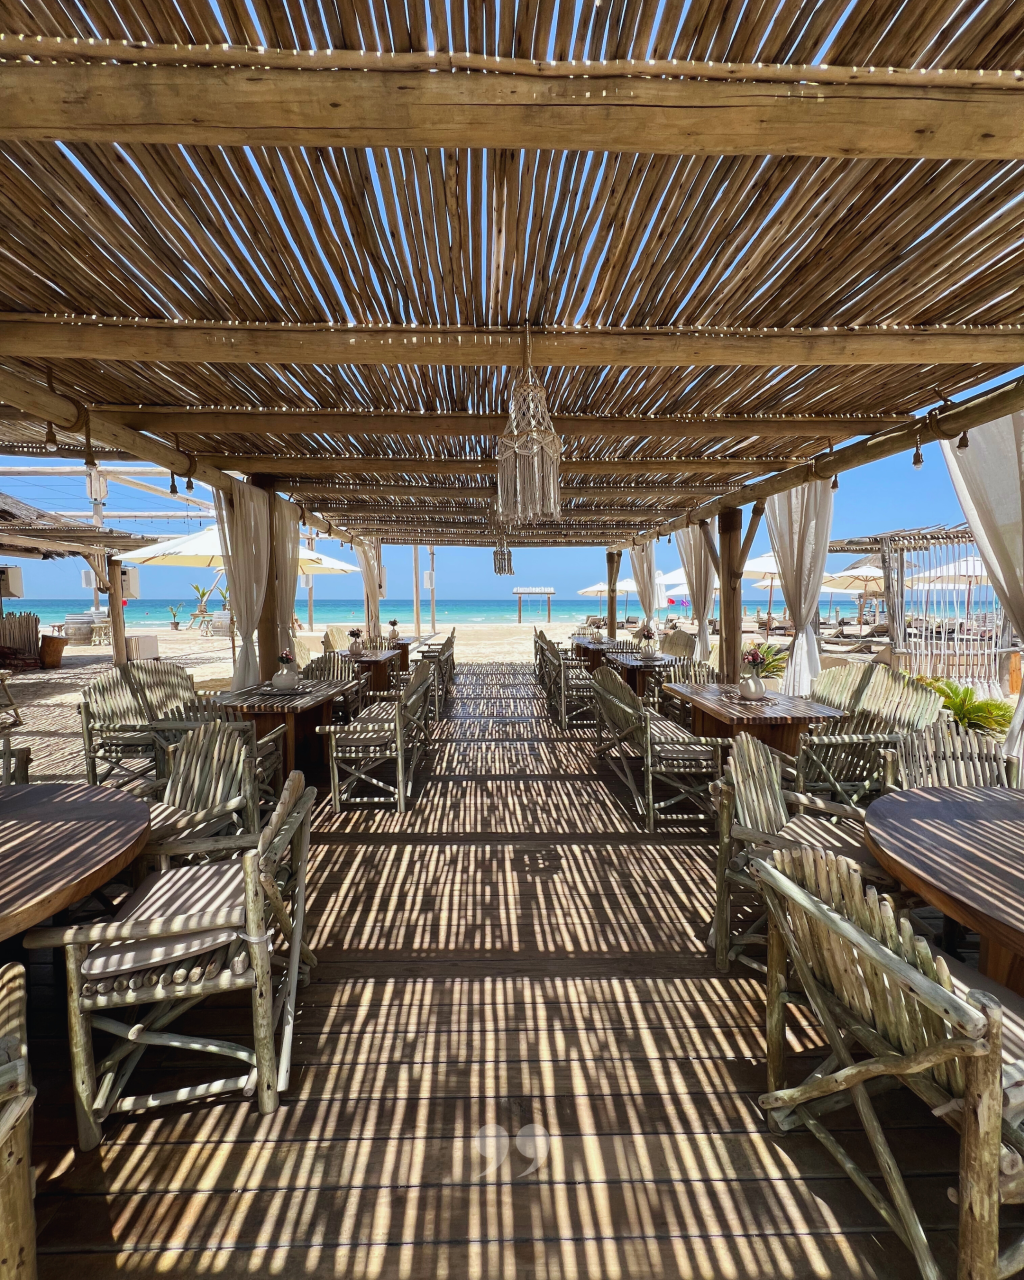 A Day at Lumi Beach: Escaping to Tranquility in Umm Al Quwain